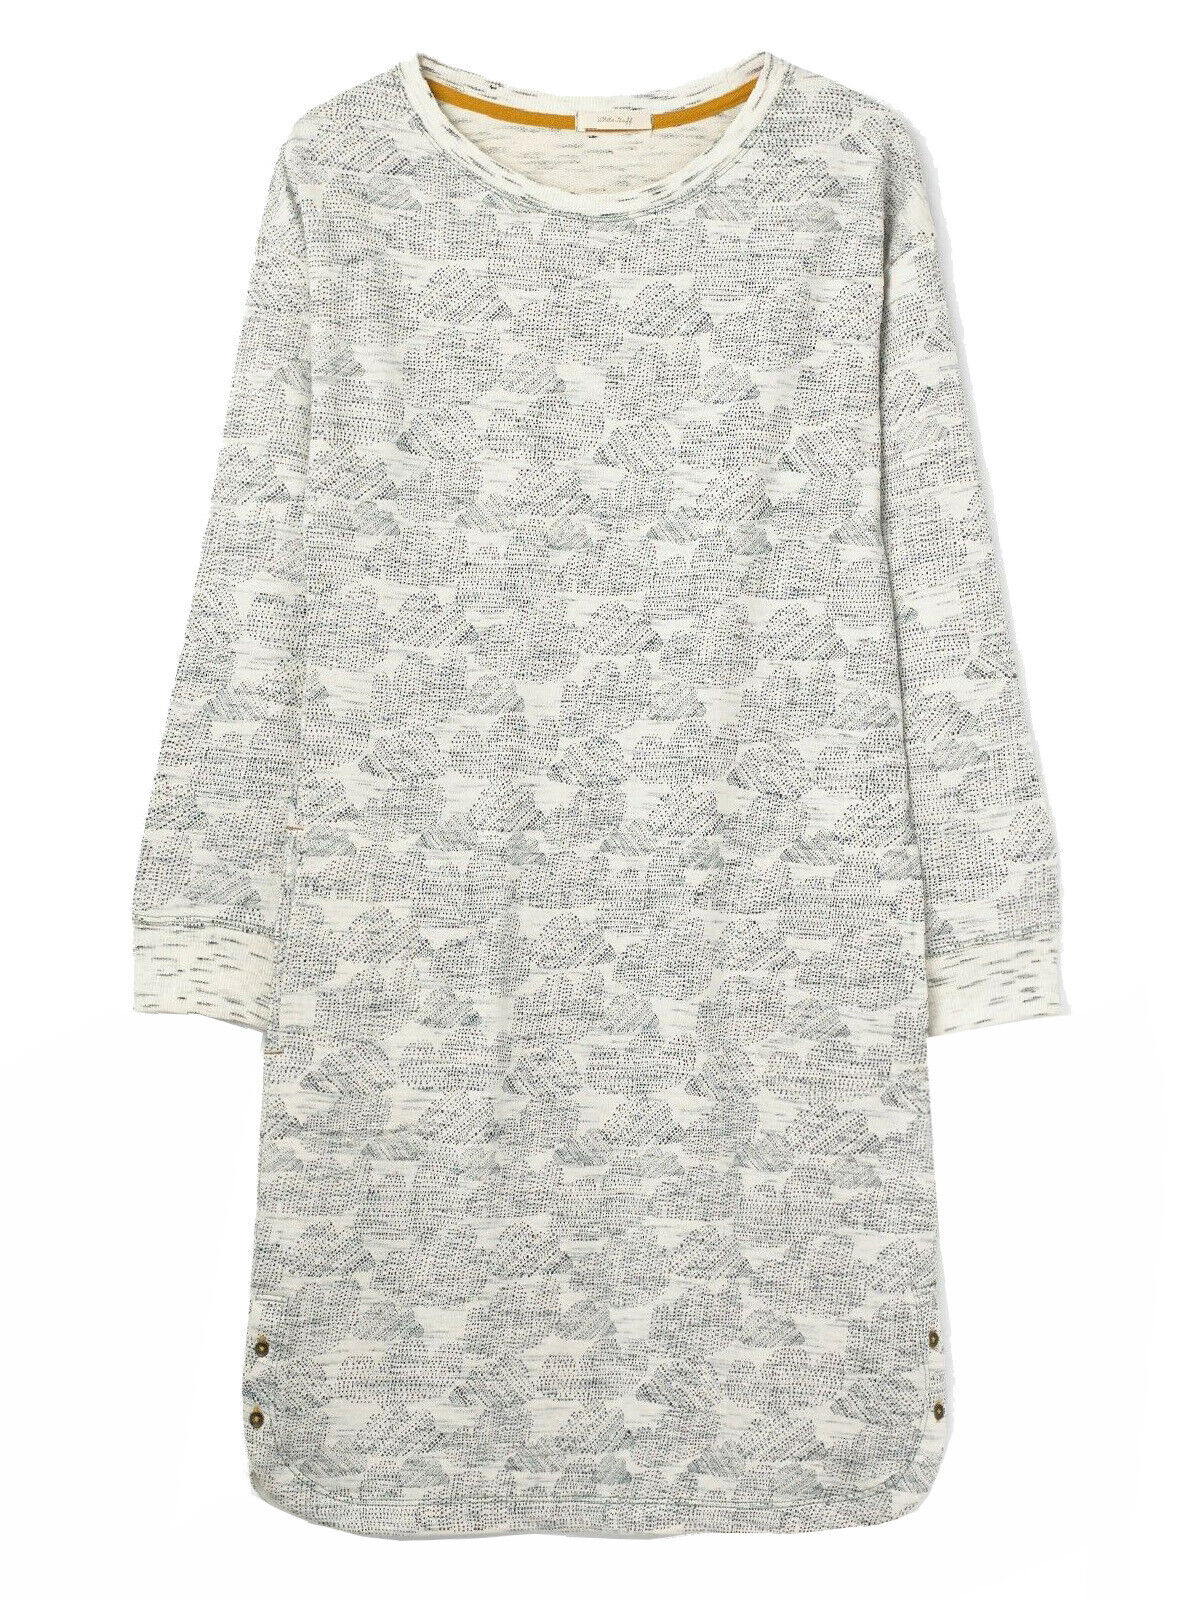 EX WHITE STUFF Grey Cloudy Day Sweater Dress in Size 12 RRP £55